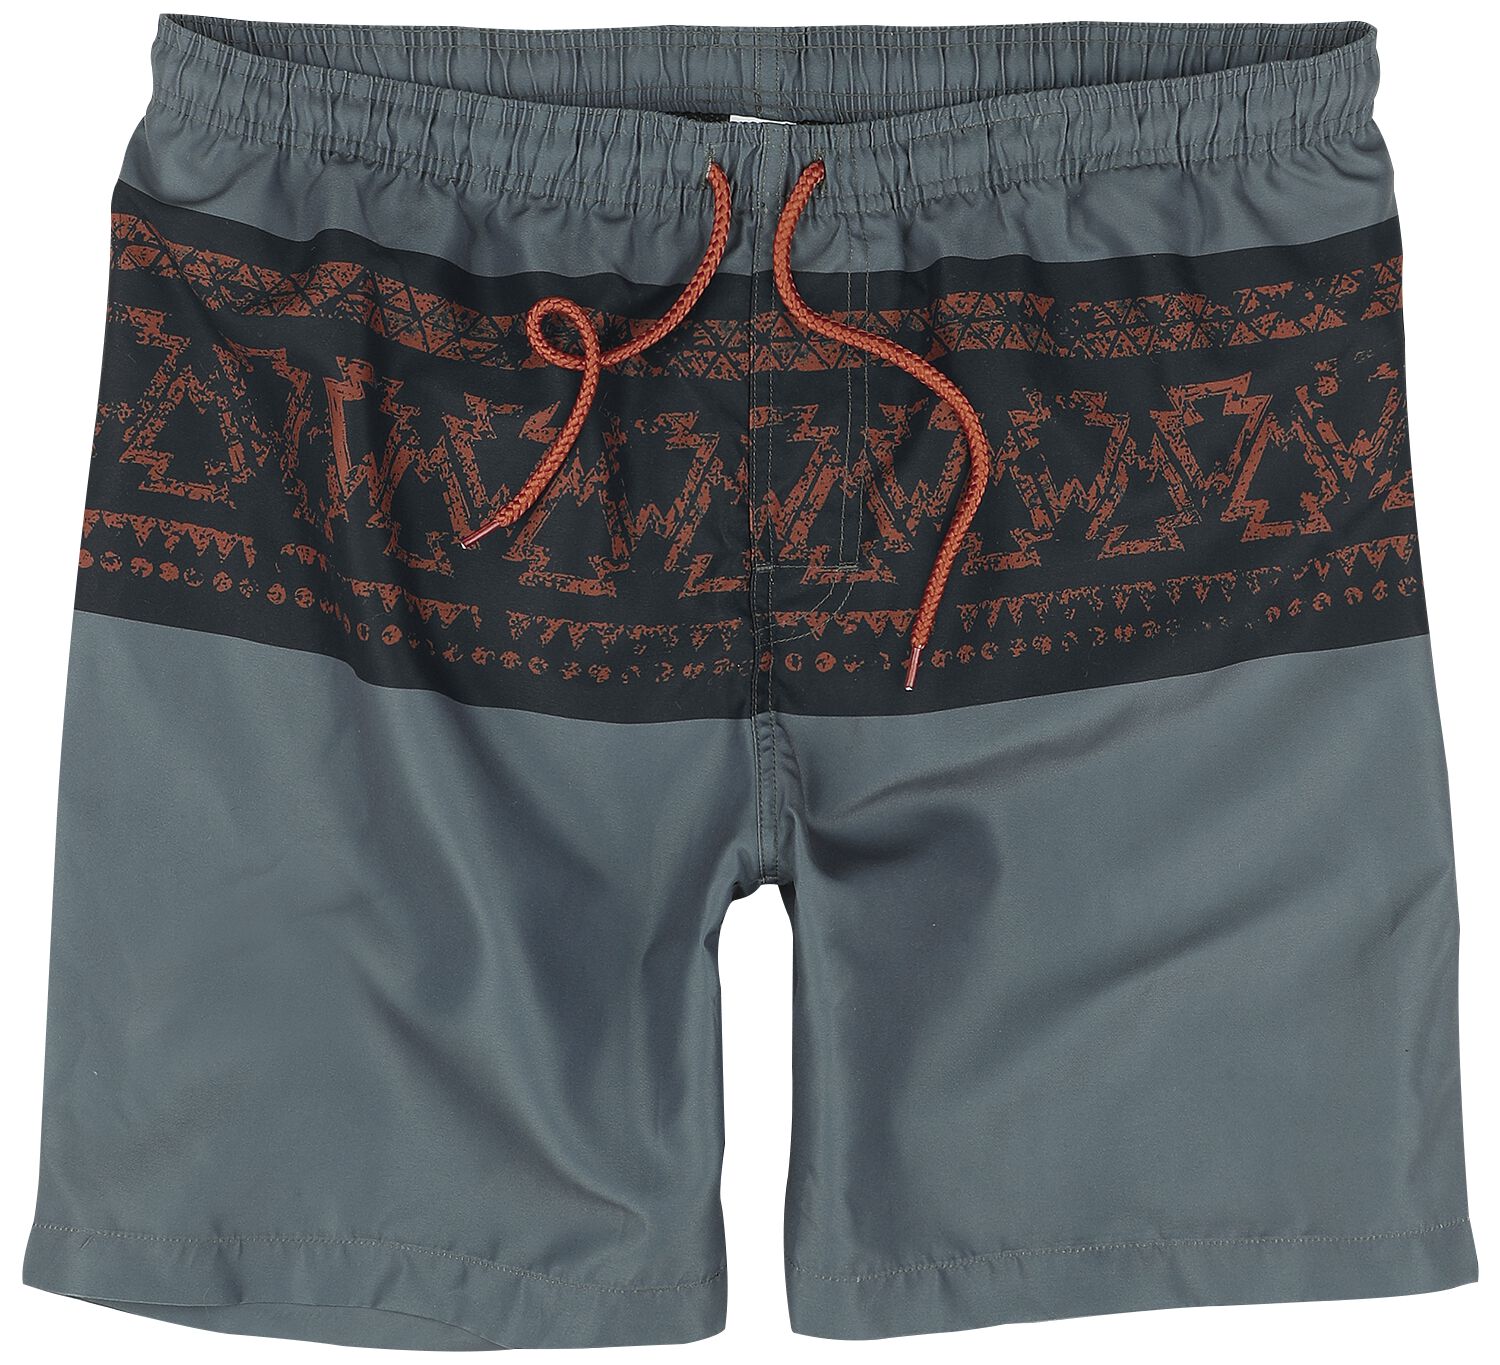 RED by EMP Swim Shorts With Graphic Design Badeshort dunkelgrau in L